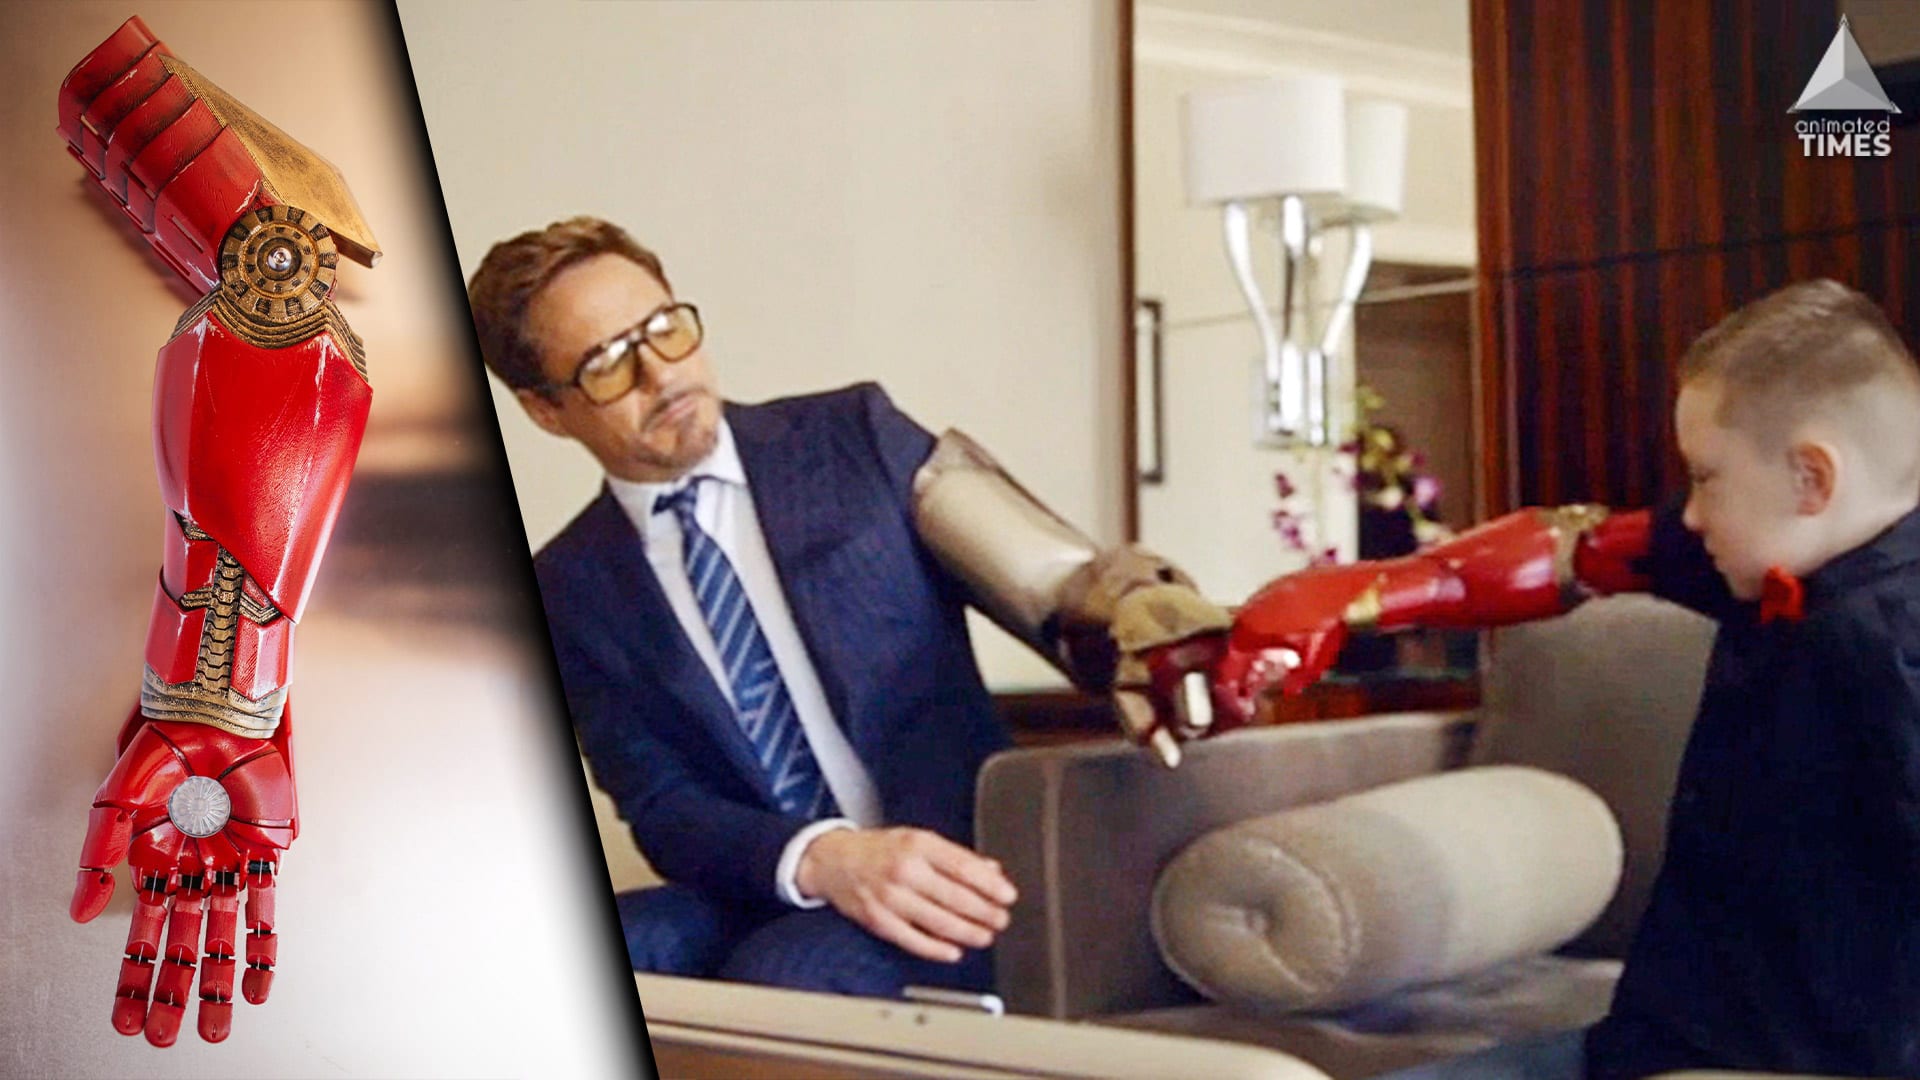 Robert Downey Jr. Surprises Kid With A Bionic Arm In True Iron Man Style